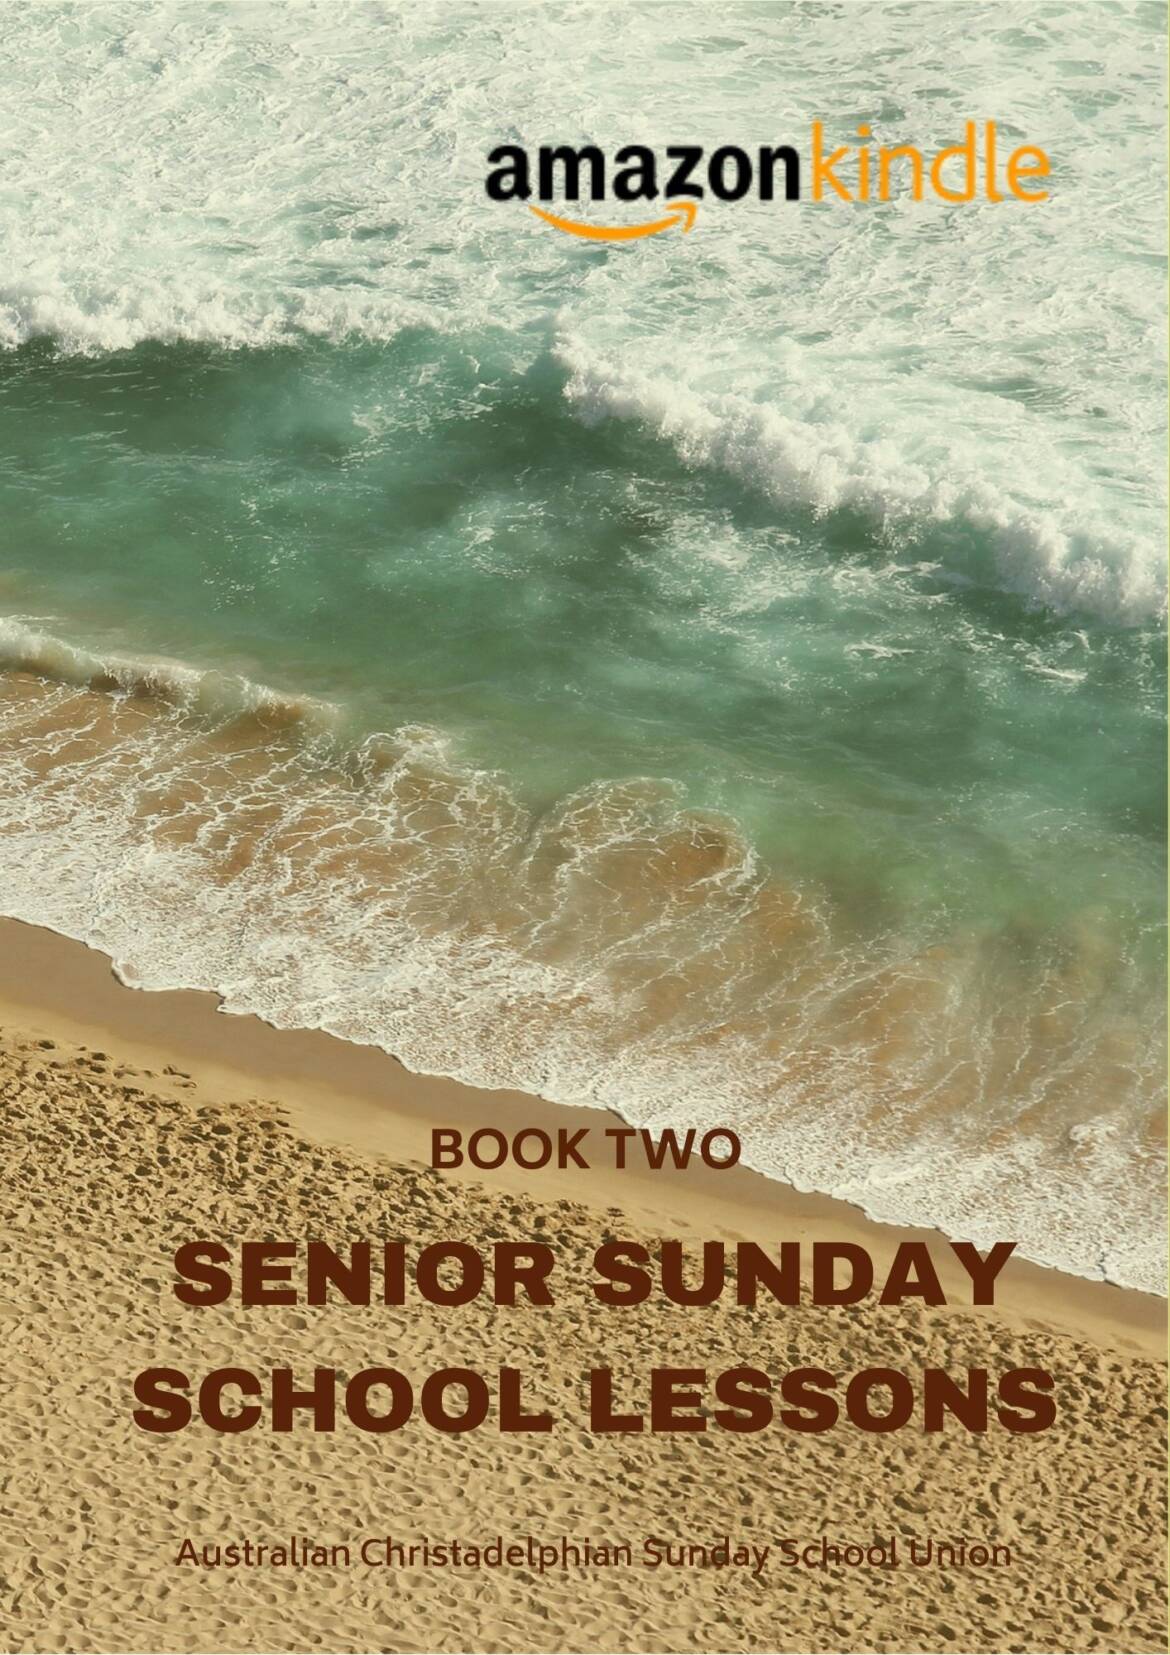 KINDLE-Cover-Senior-Sunday-School-Lessons-Year-Two.jpg